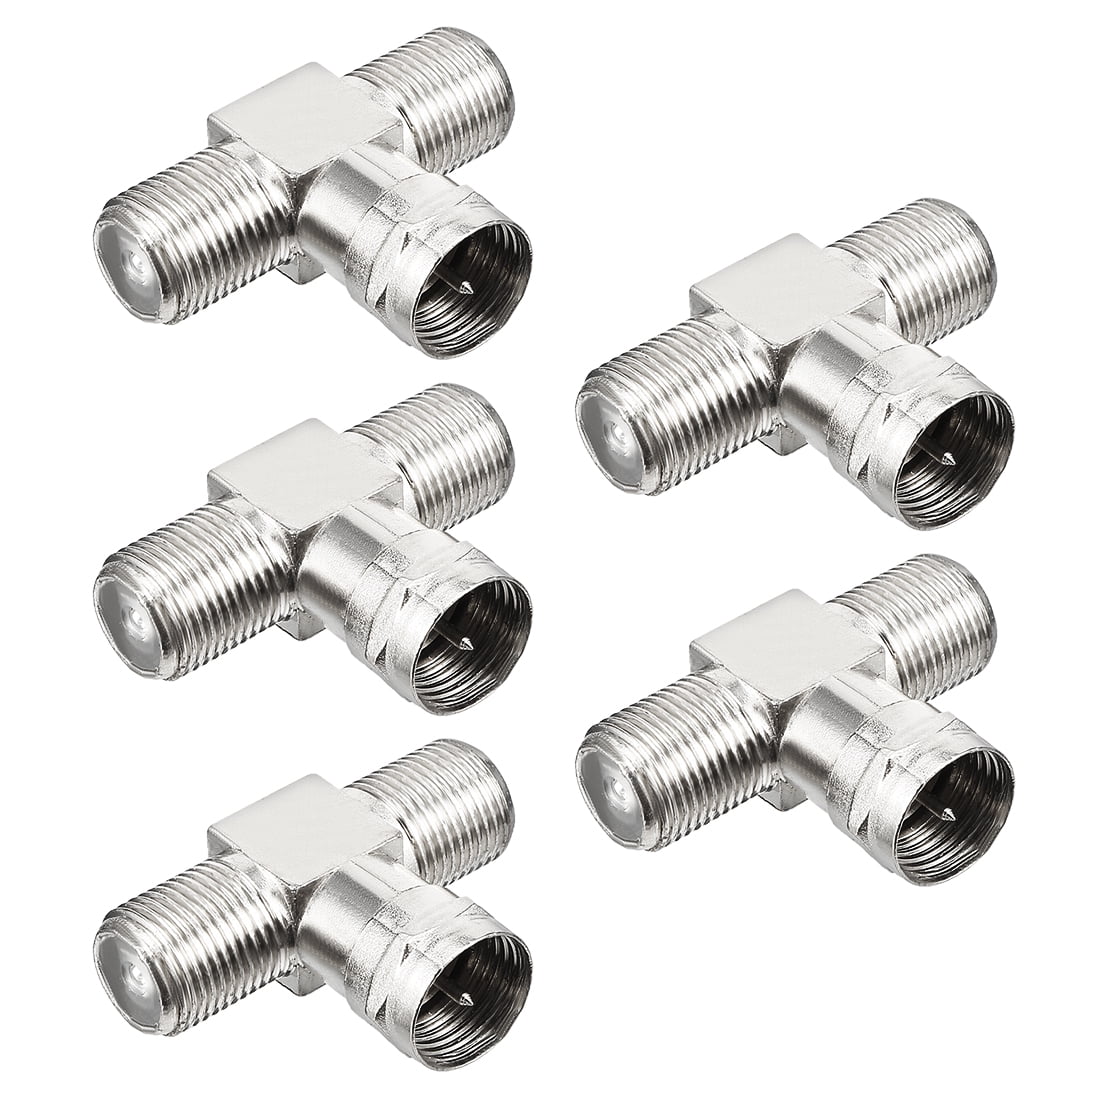 5pcs Silver Tone BSP 3 Ways F Male to 2 F Female Jack RF Coaxial Connector 